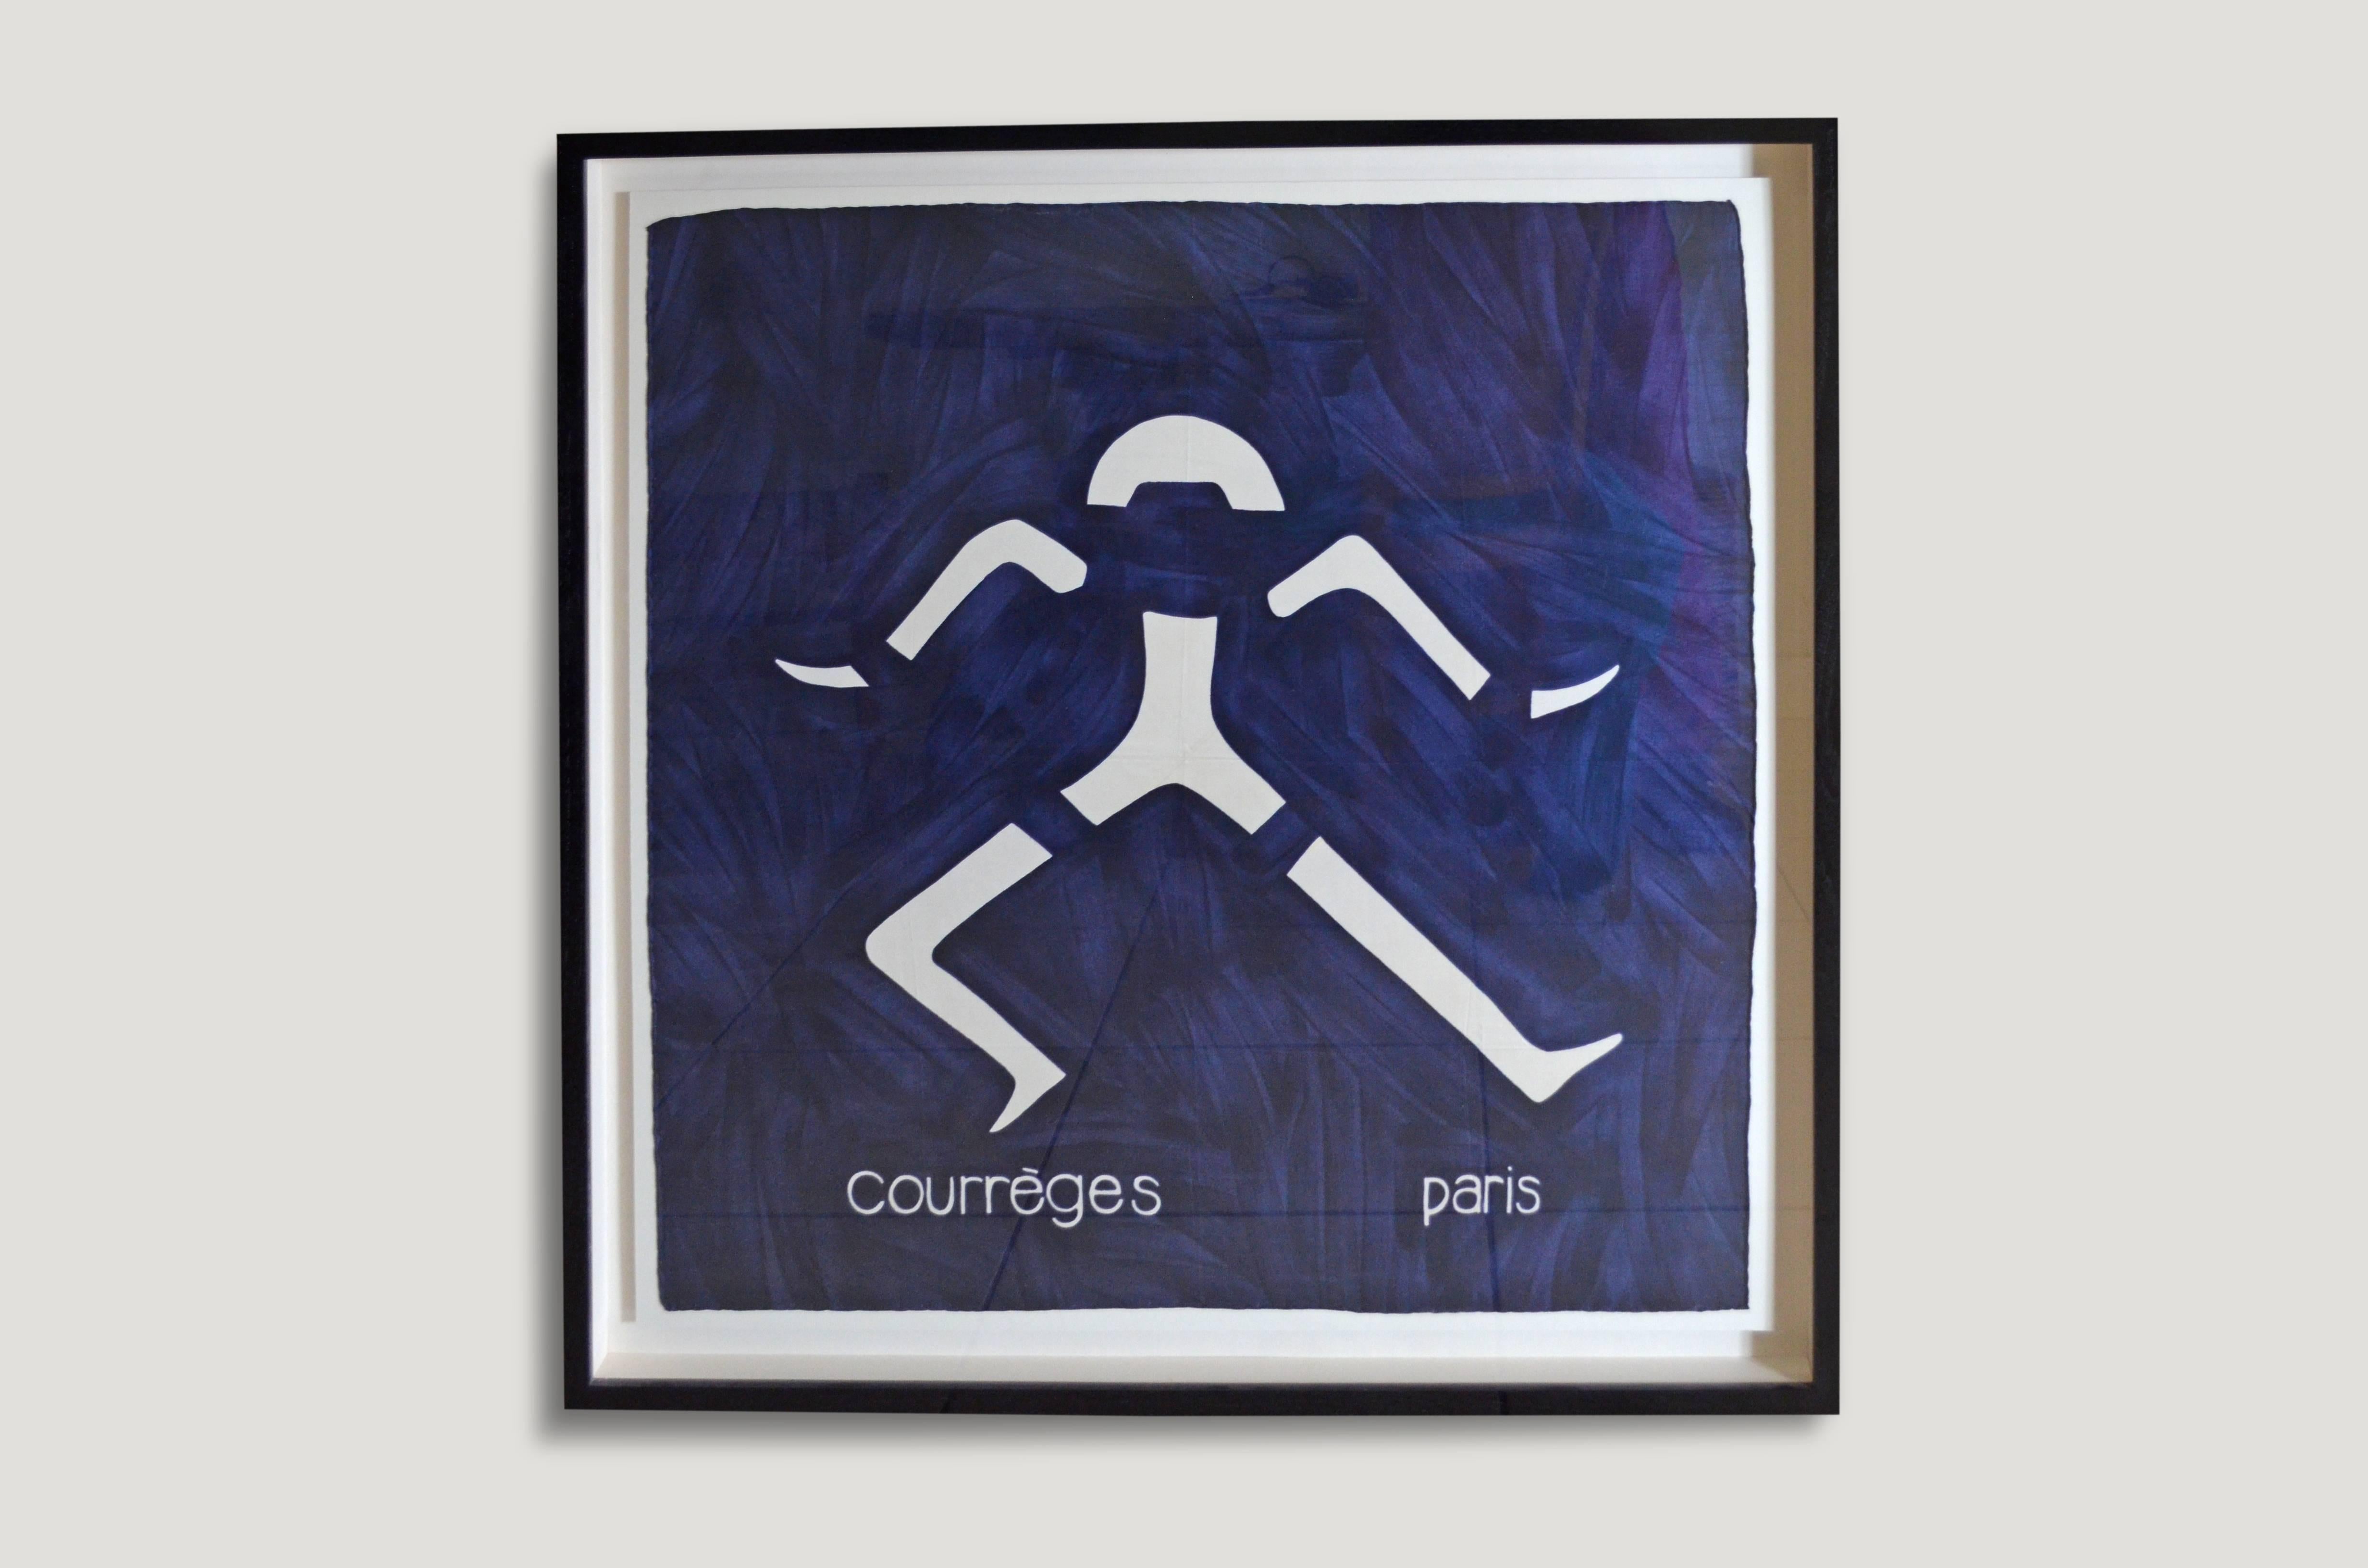 Rare, vintage Courrèges scarf from Paris in excellent condition. Set in a modern espresso stained teak boxed frame.

Andrianna Shamaris. The Leader In Modern Organic Design™